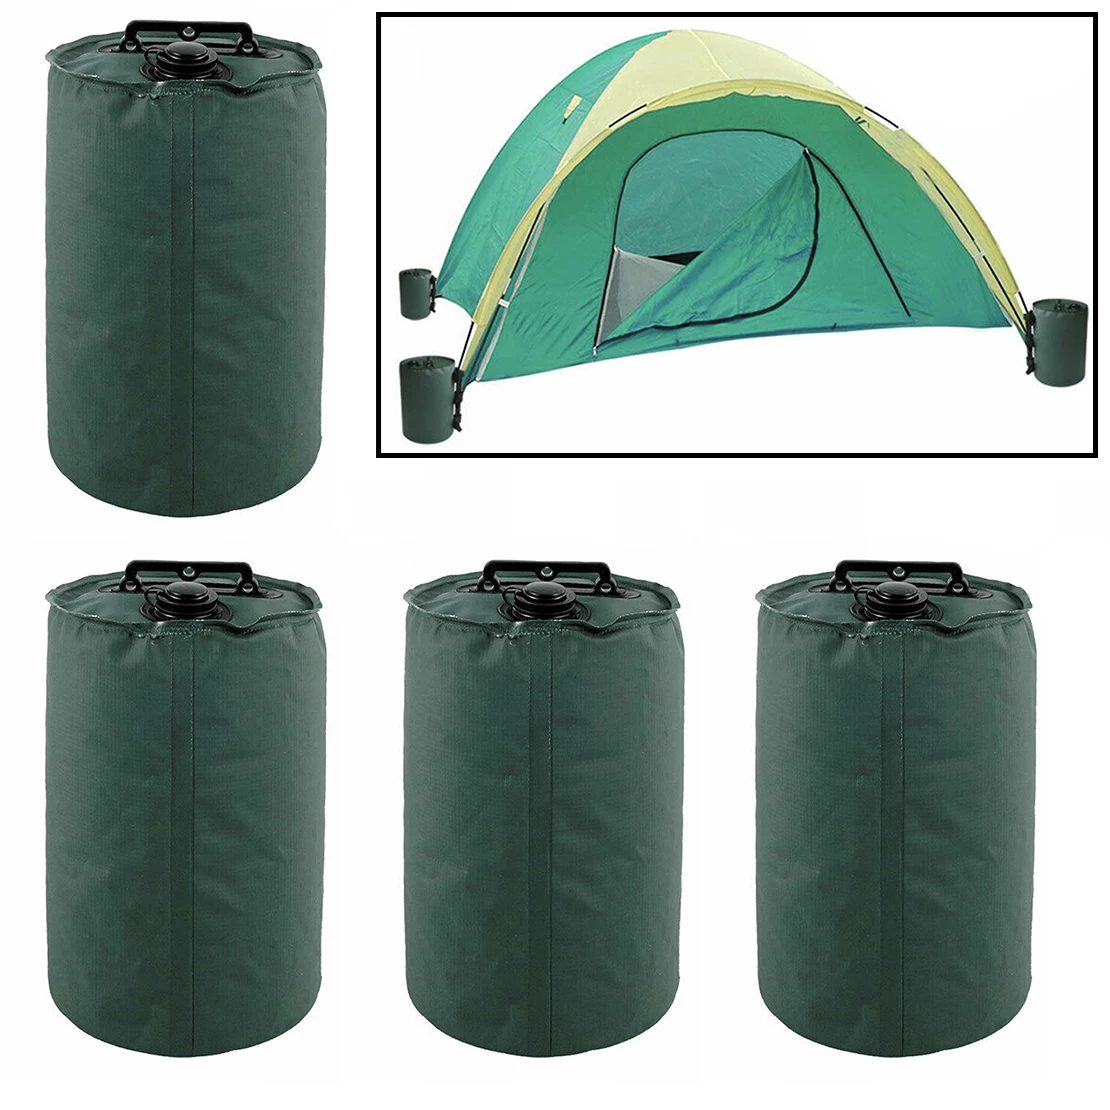 4Pcs Weight Water Sand Bag Large Capacity Tent Leg Foot Green for Outdoor Garden Gazebo Canopy Tripod Marquee Camping Awning